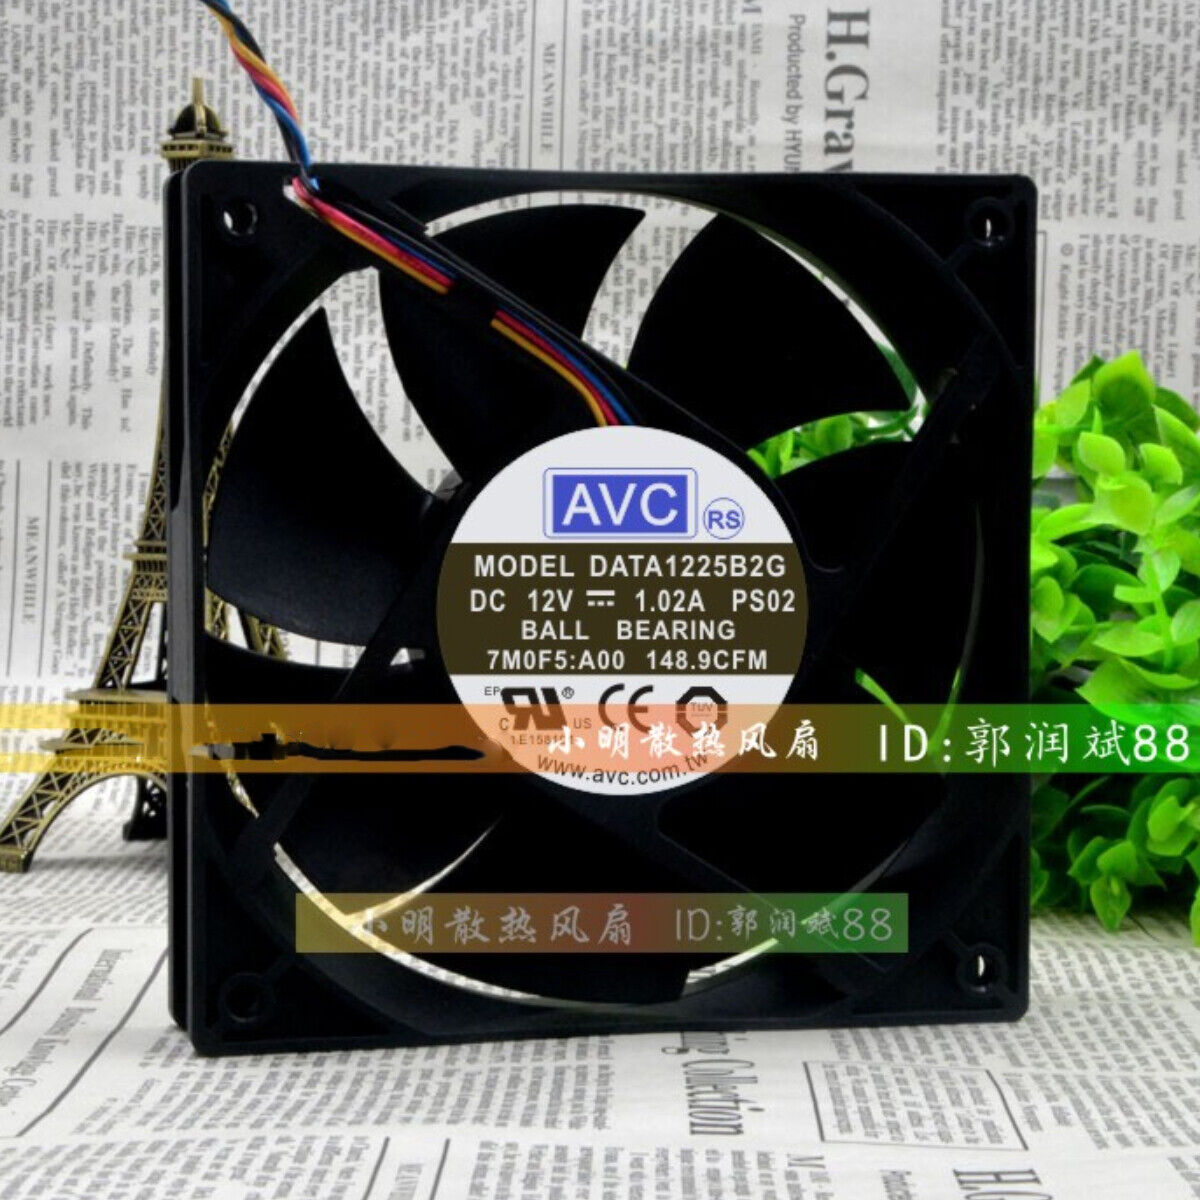 AVC 12025 12cm DATA1225B2G 12V 1.02A 4-wire Chassis Large Air Volume Cooling Fan